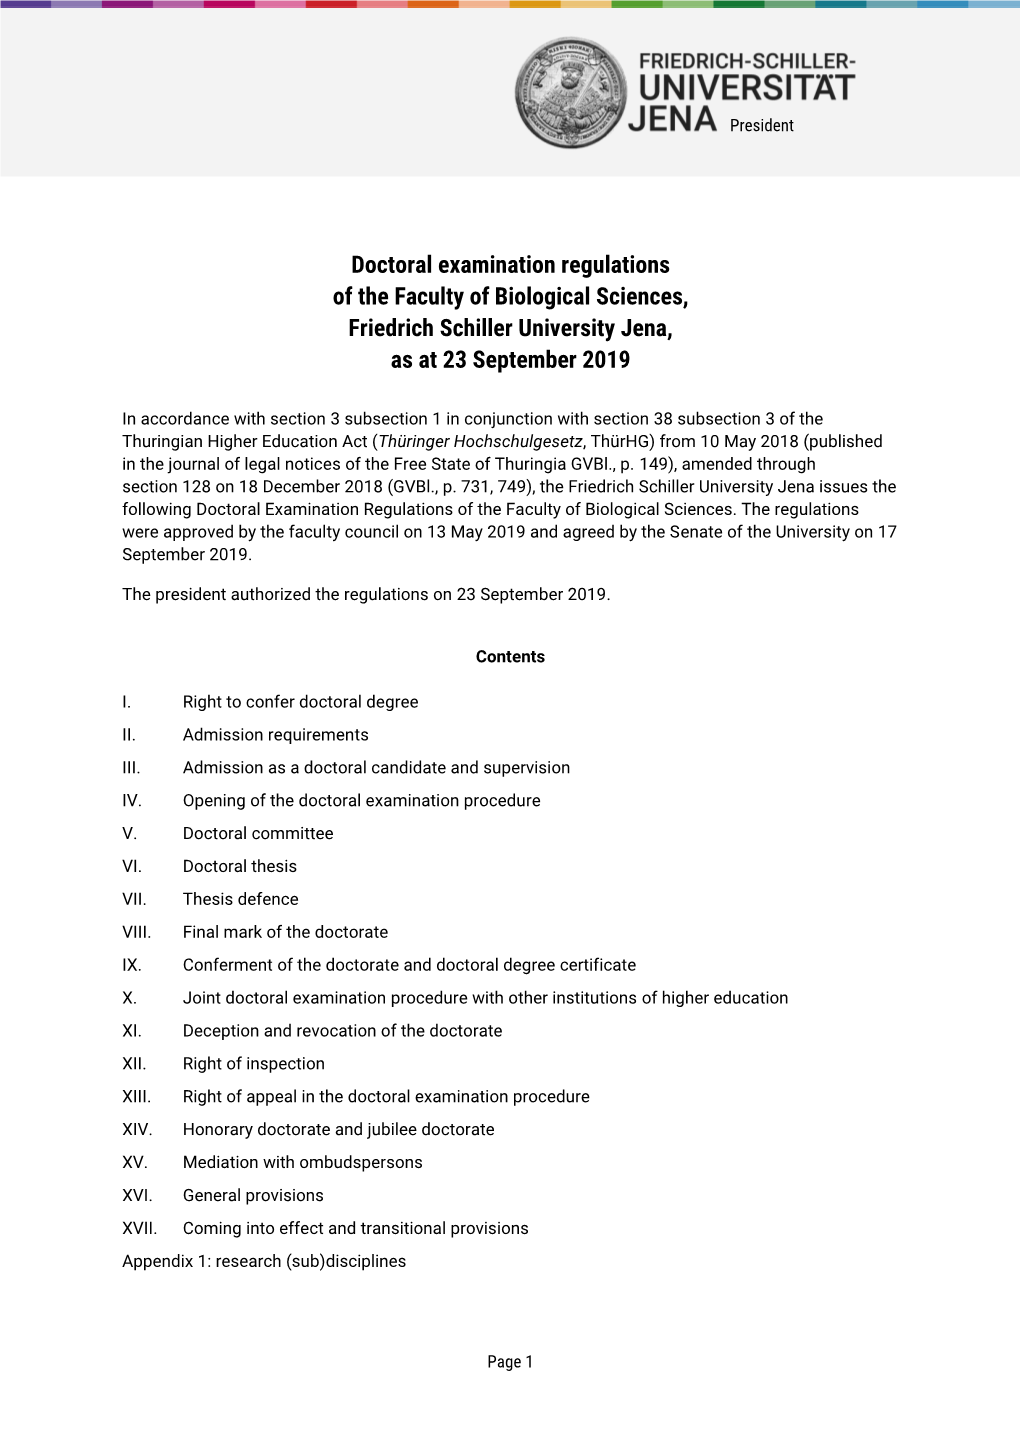 Doctoral Examination Regulations of the Faculty of Biological Sciences, Friedrich Schiller University Jena, As at 23 September 2019